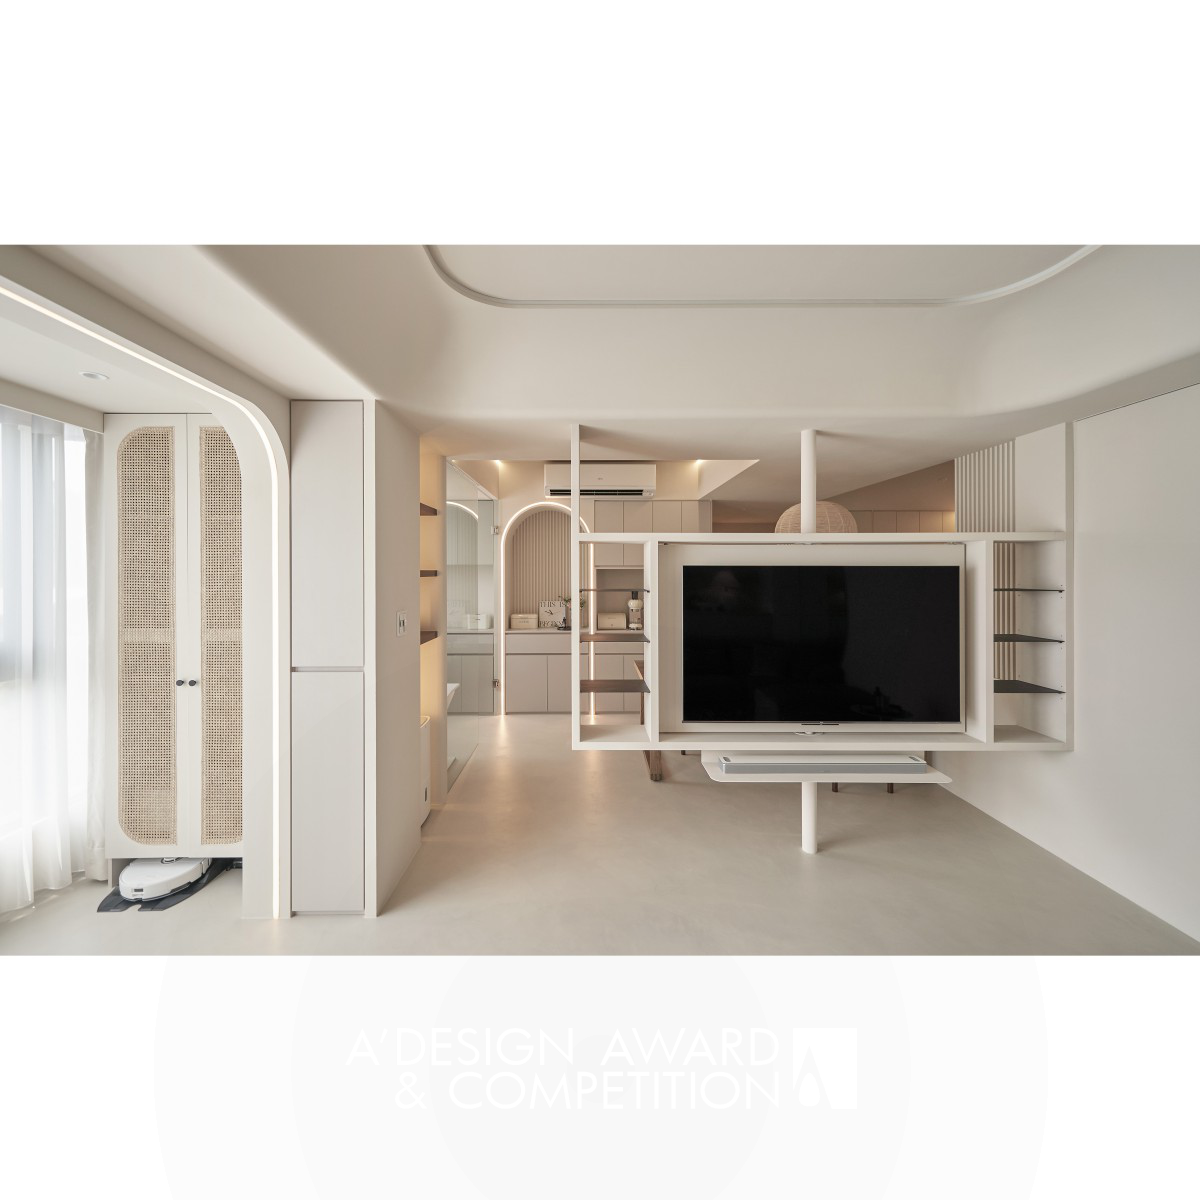 Tzu Cheng Huang wins Bronze at the prestigious A' Interior Space, Retail and Exhibition Design Award with Unique Timeless Residential Apartment.